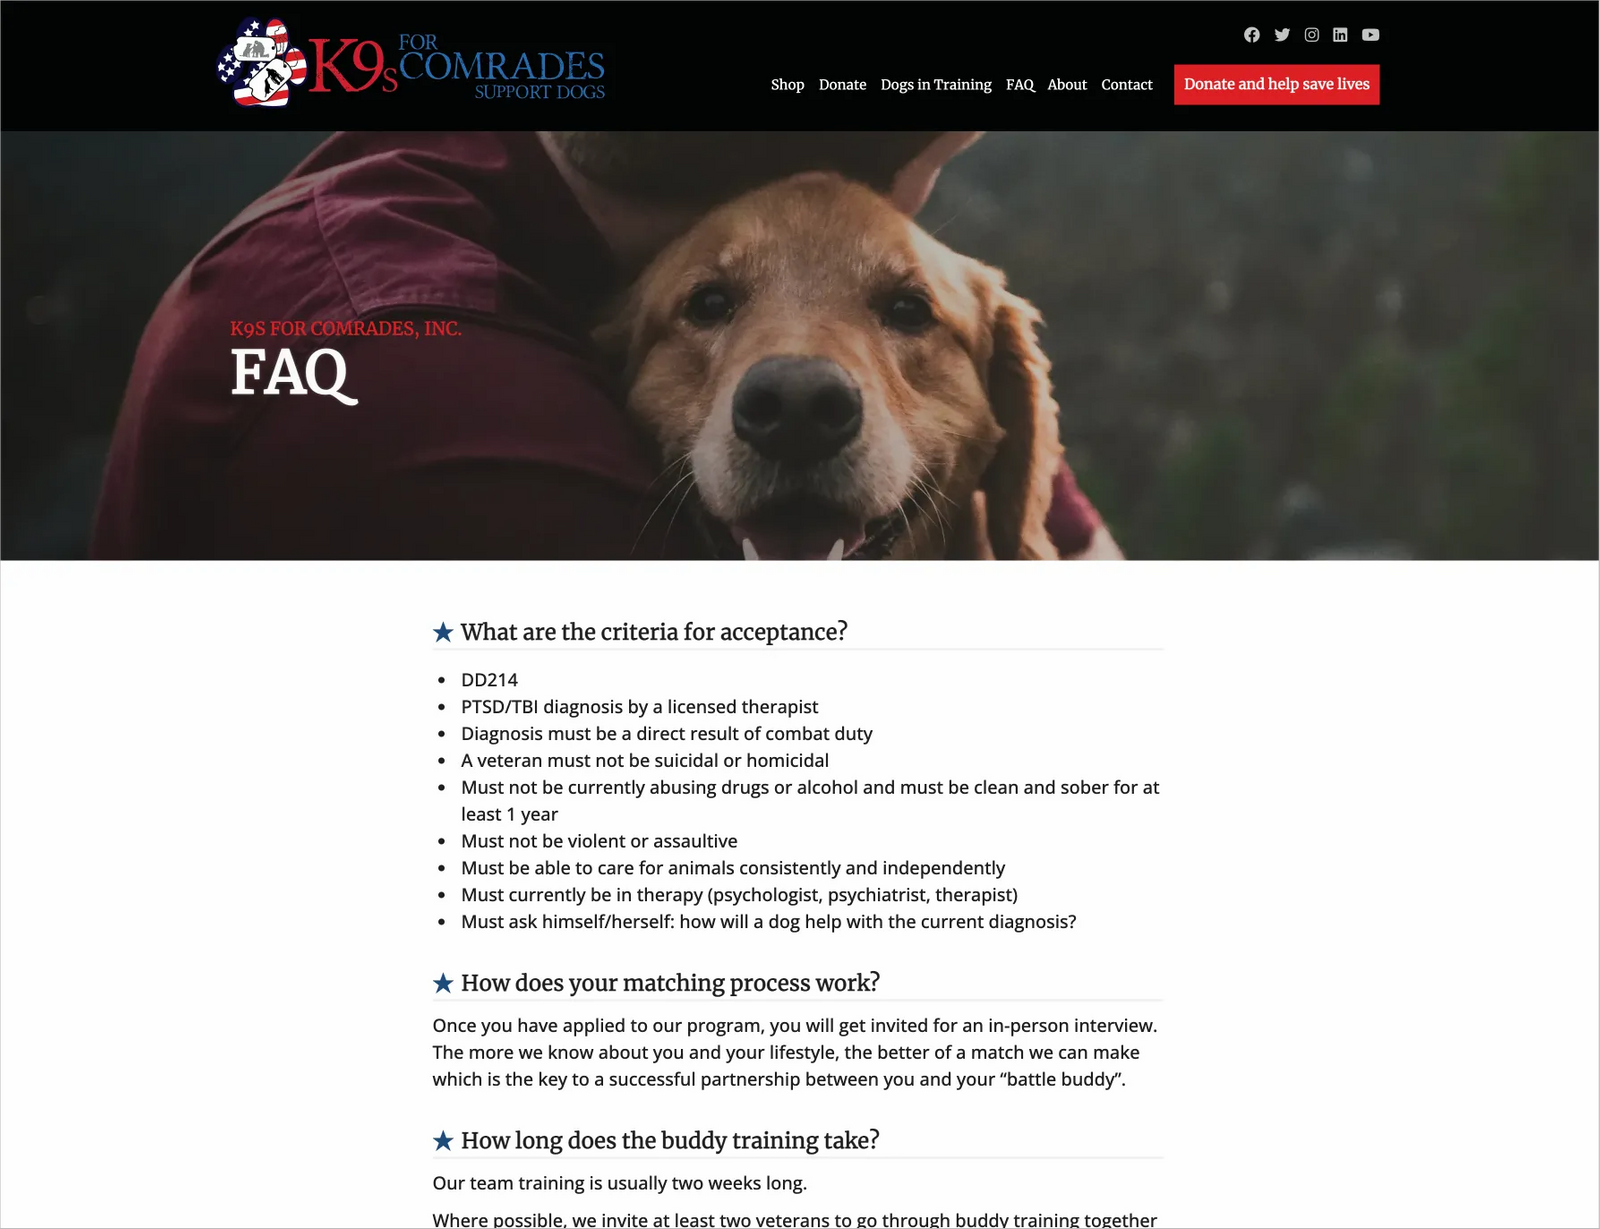 Example of FAQs page on the K-9s for Comrades website.